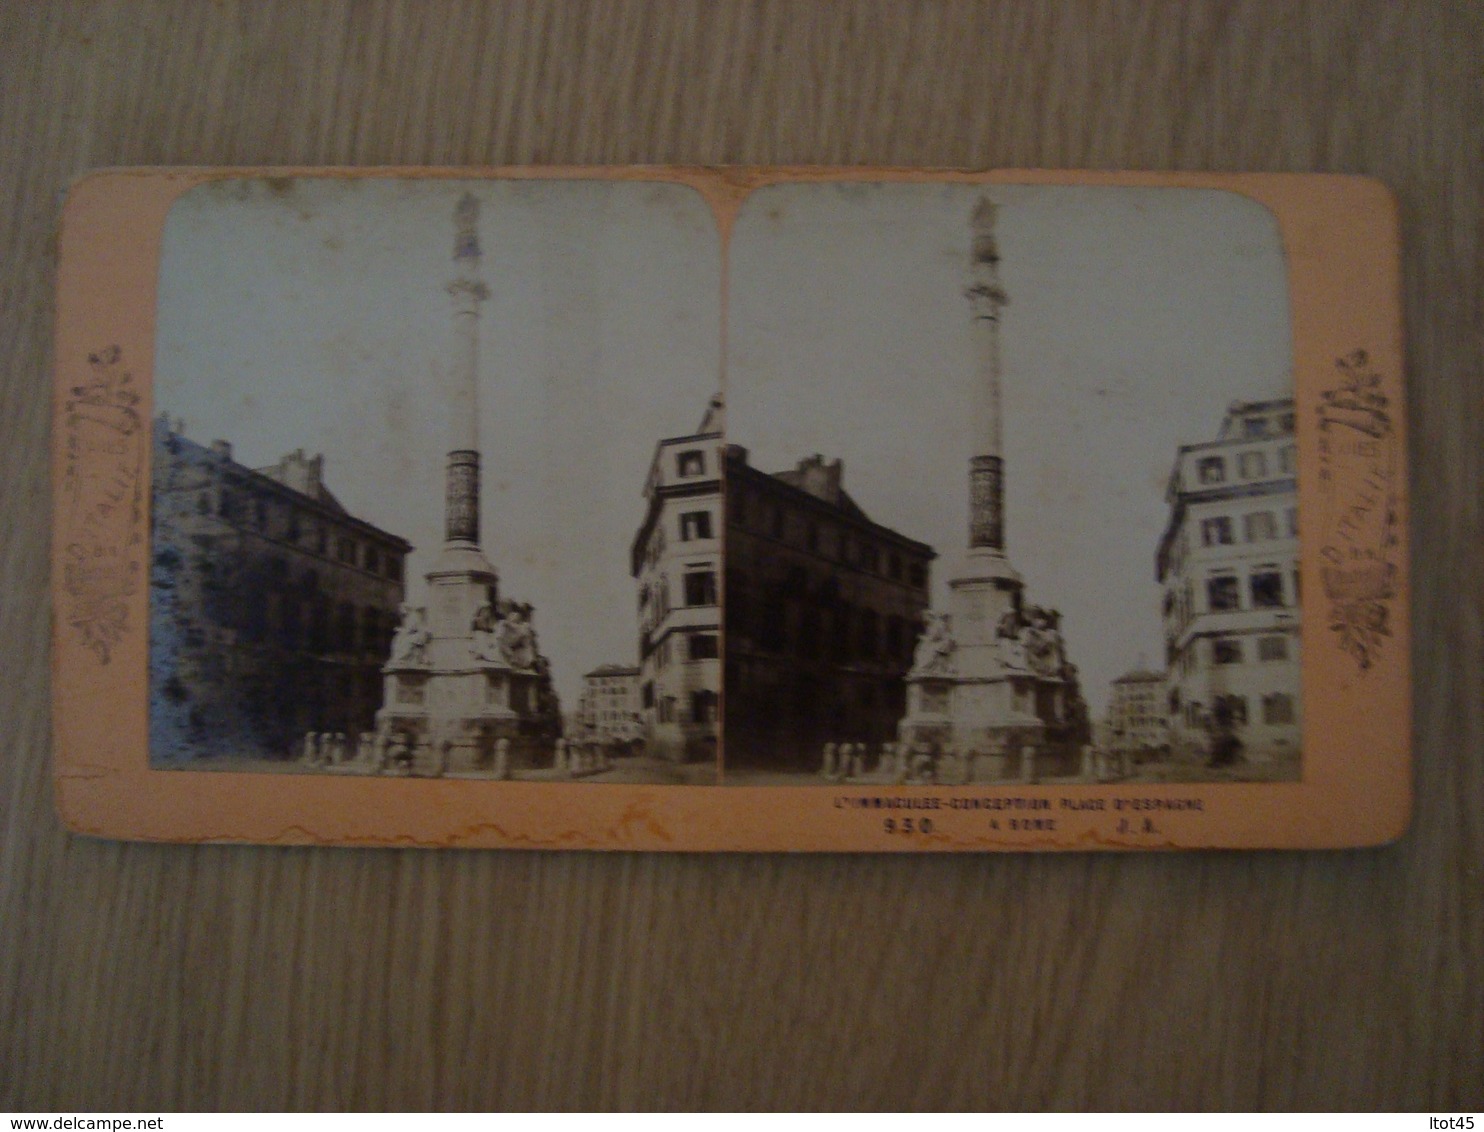 CARTE STEREOSCOPIQUE L'IMMACULEE-CONCEPTION PLACE D'ESPAGNE ITALIE ROME - Stereoscope Cards